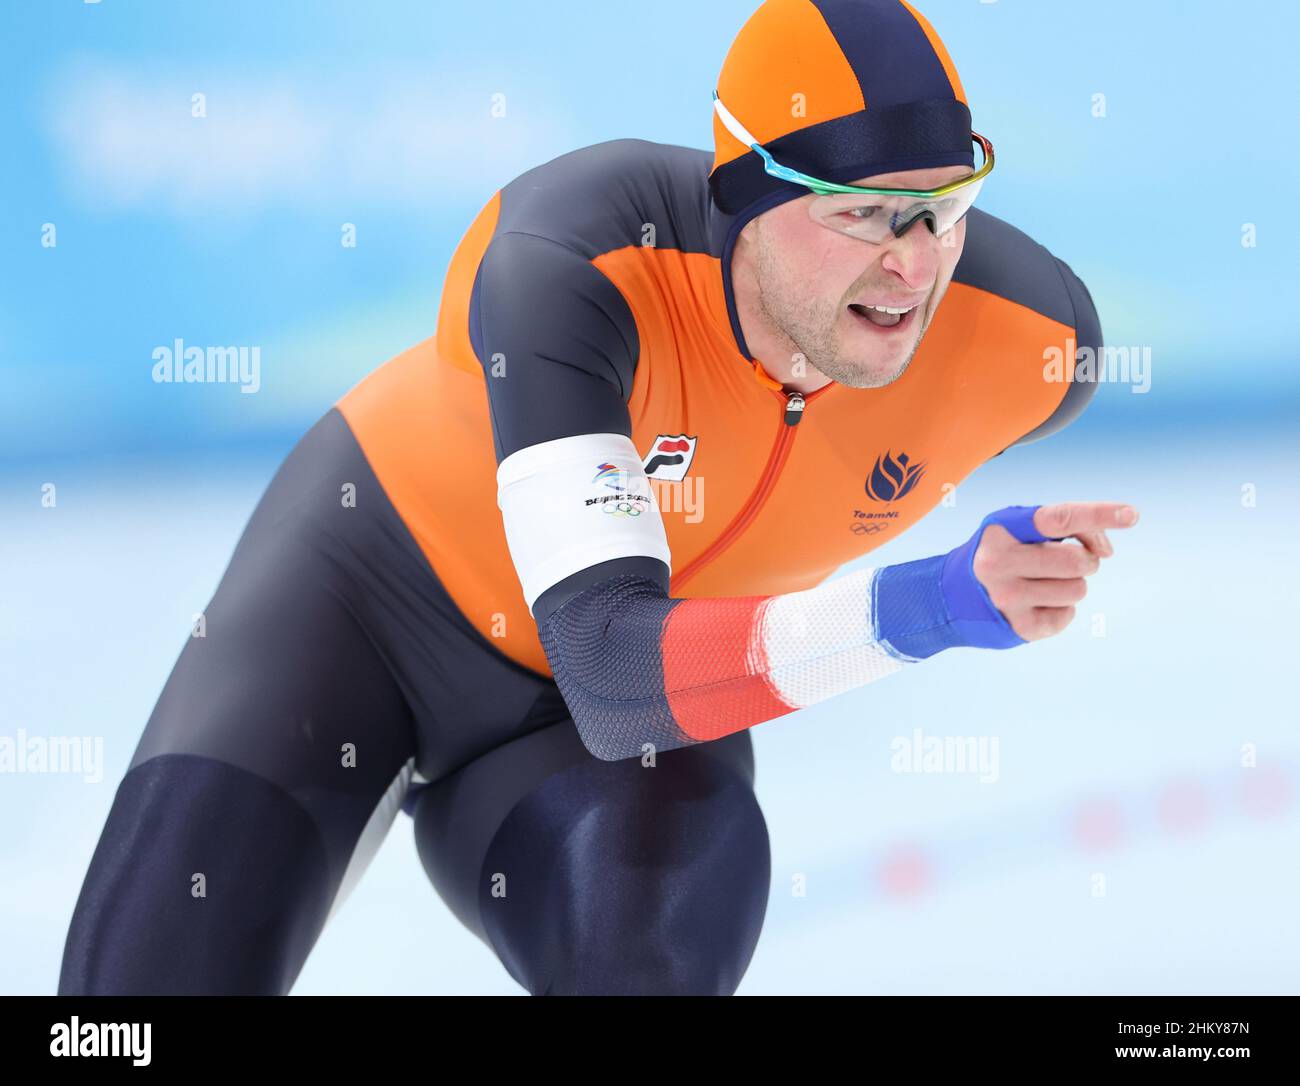 Beijing, China. 6th Feb, 2022. Sven Kramer of the Netherlands competes during the men's 5,000m final of speed skating at the National Speed Skating Oval in Beijing, capital of China, Feb. 6, 2022. Credit: Cheng Tingting/Xinhua/Alamy Live News Stock Photo